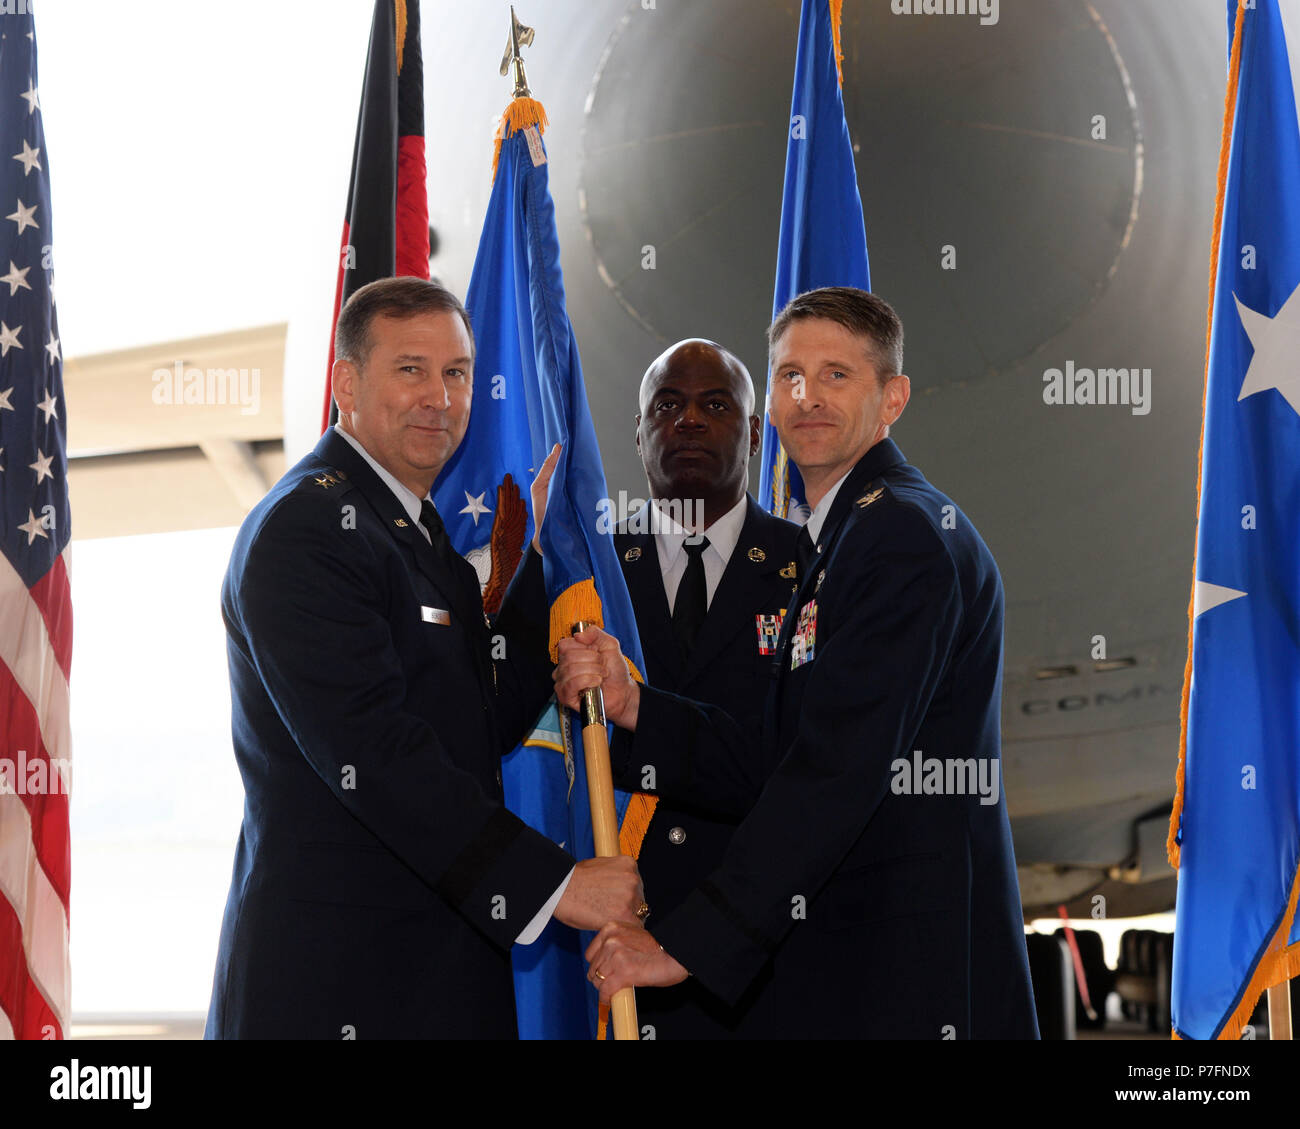 U.S. Air Force Maj. Gen. Christopher J. Bence, commander of the U.S. Air Force Expeditionary Center, passes the guidon and command of the 521st Air Mobility Operations Wing to Col. Bradley L. Spears in a ceremony June 28, 2018. The 521st AMOW provides forward-deployed command and control, aerial port, and aircraft maintenance support to DoD organic and contracted commercial aircraft executing airlift and air refueling missions throughout the U.S. Air Forces in Europe - Air Forces Africa area of responsibility. (U.S. Air Force photo by Airman 1st Class Ariel Leighty) Stock Photo